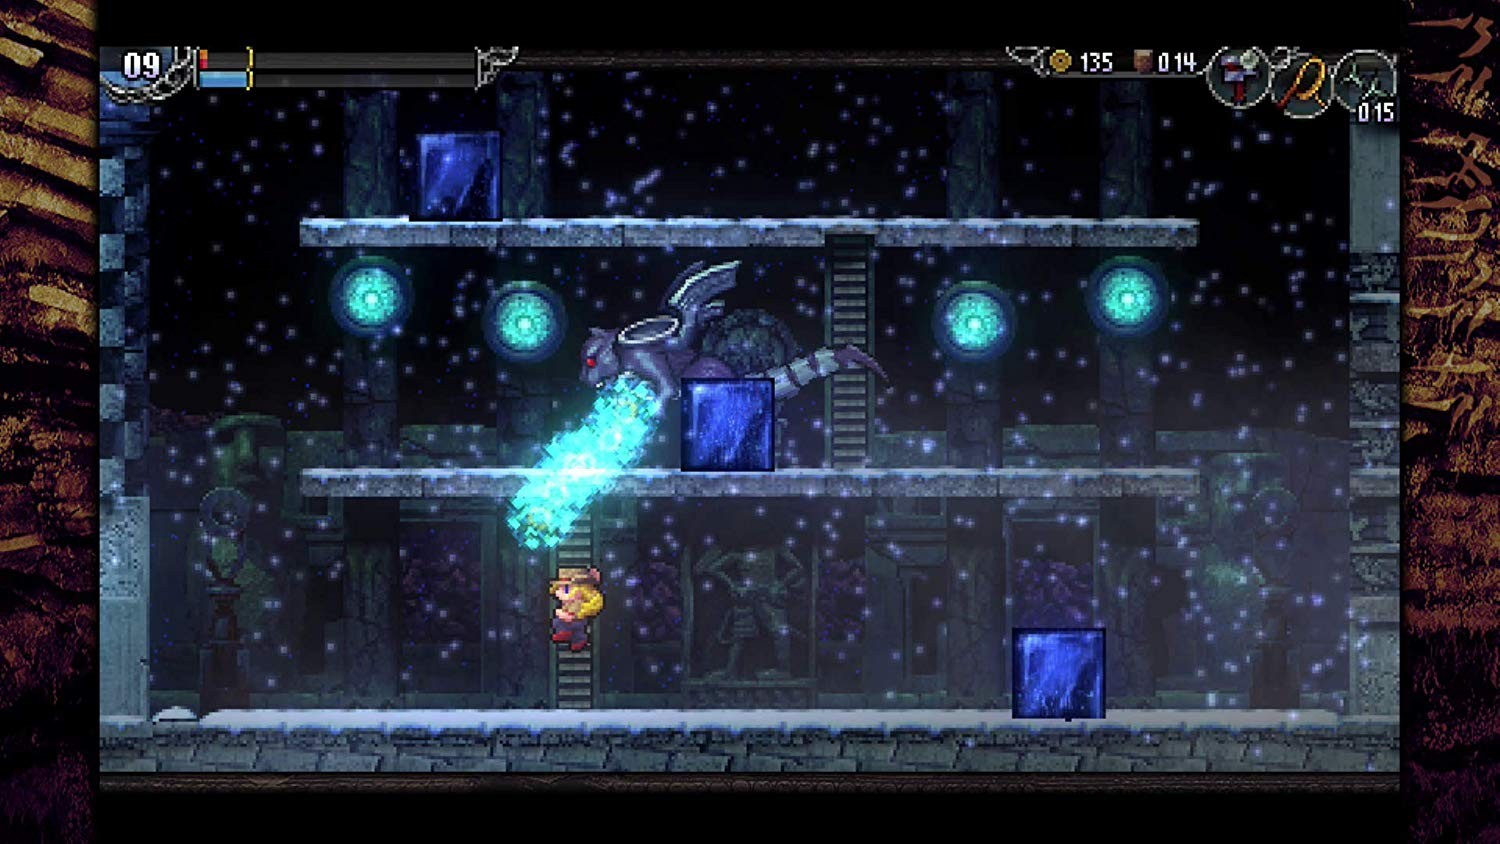 La-Mulana 1 & 2, xone, xbox one,switch, nintendo switch, ps4, playstation 4,us, north america, europe, release date, gameplay, features, price, pre-order now, nigoro, nis america